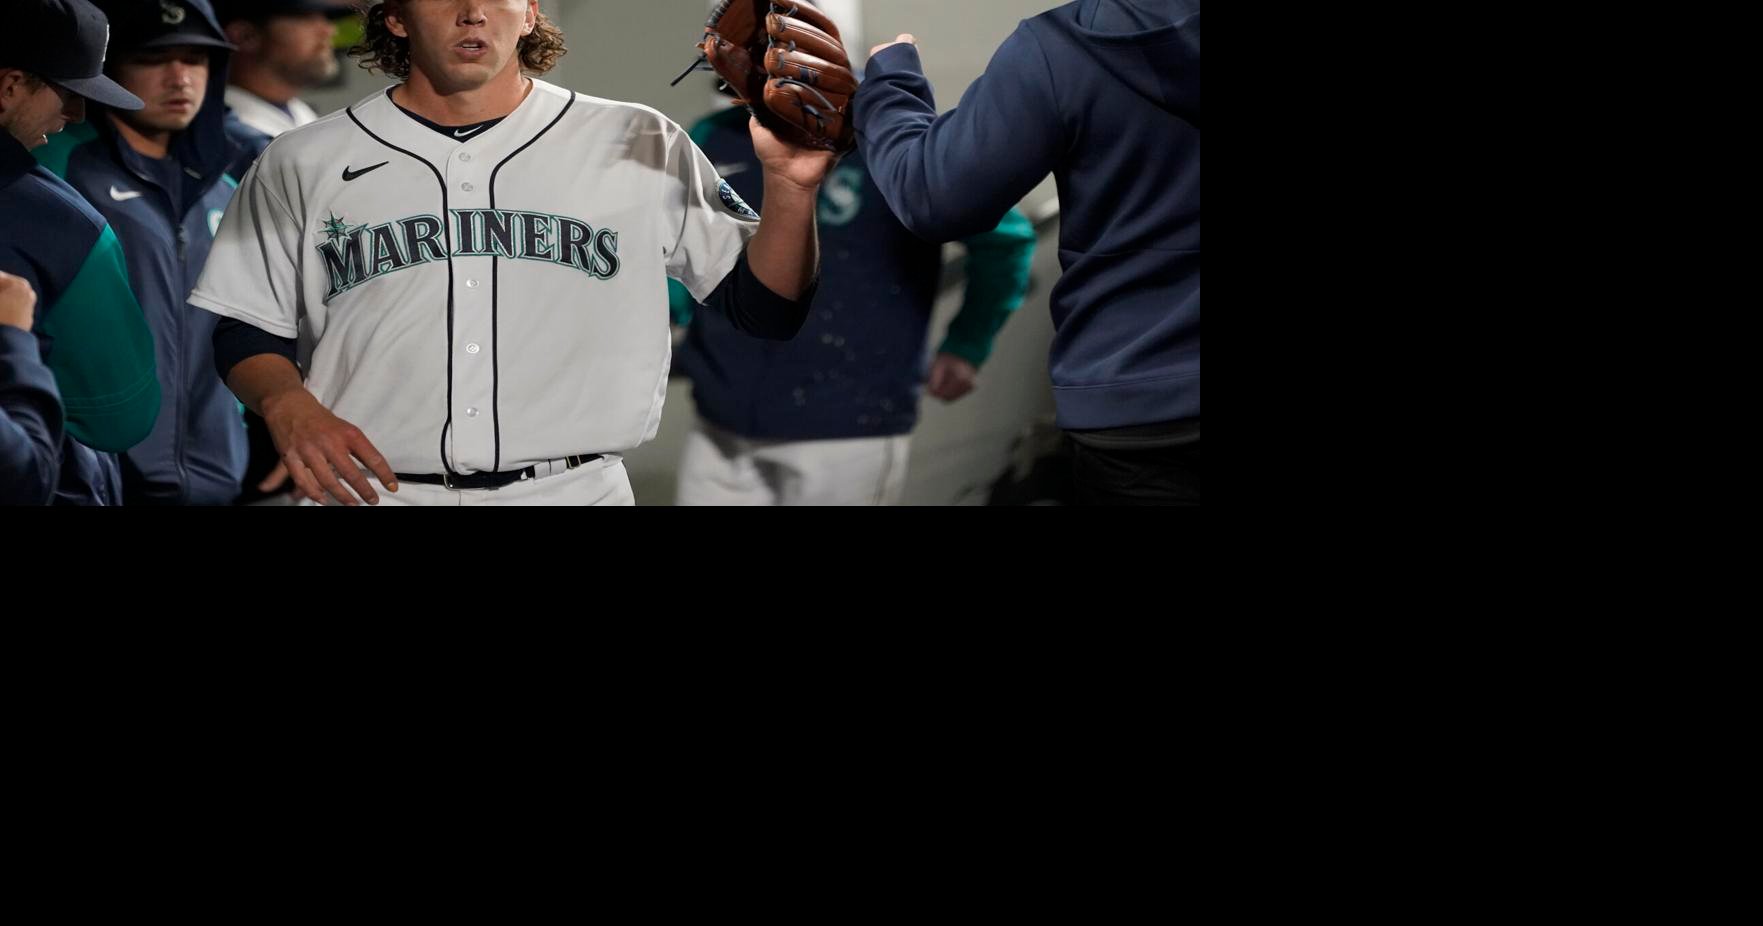 KING 5 Sports catches up with Mariners 1B Ty France at MLB All